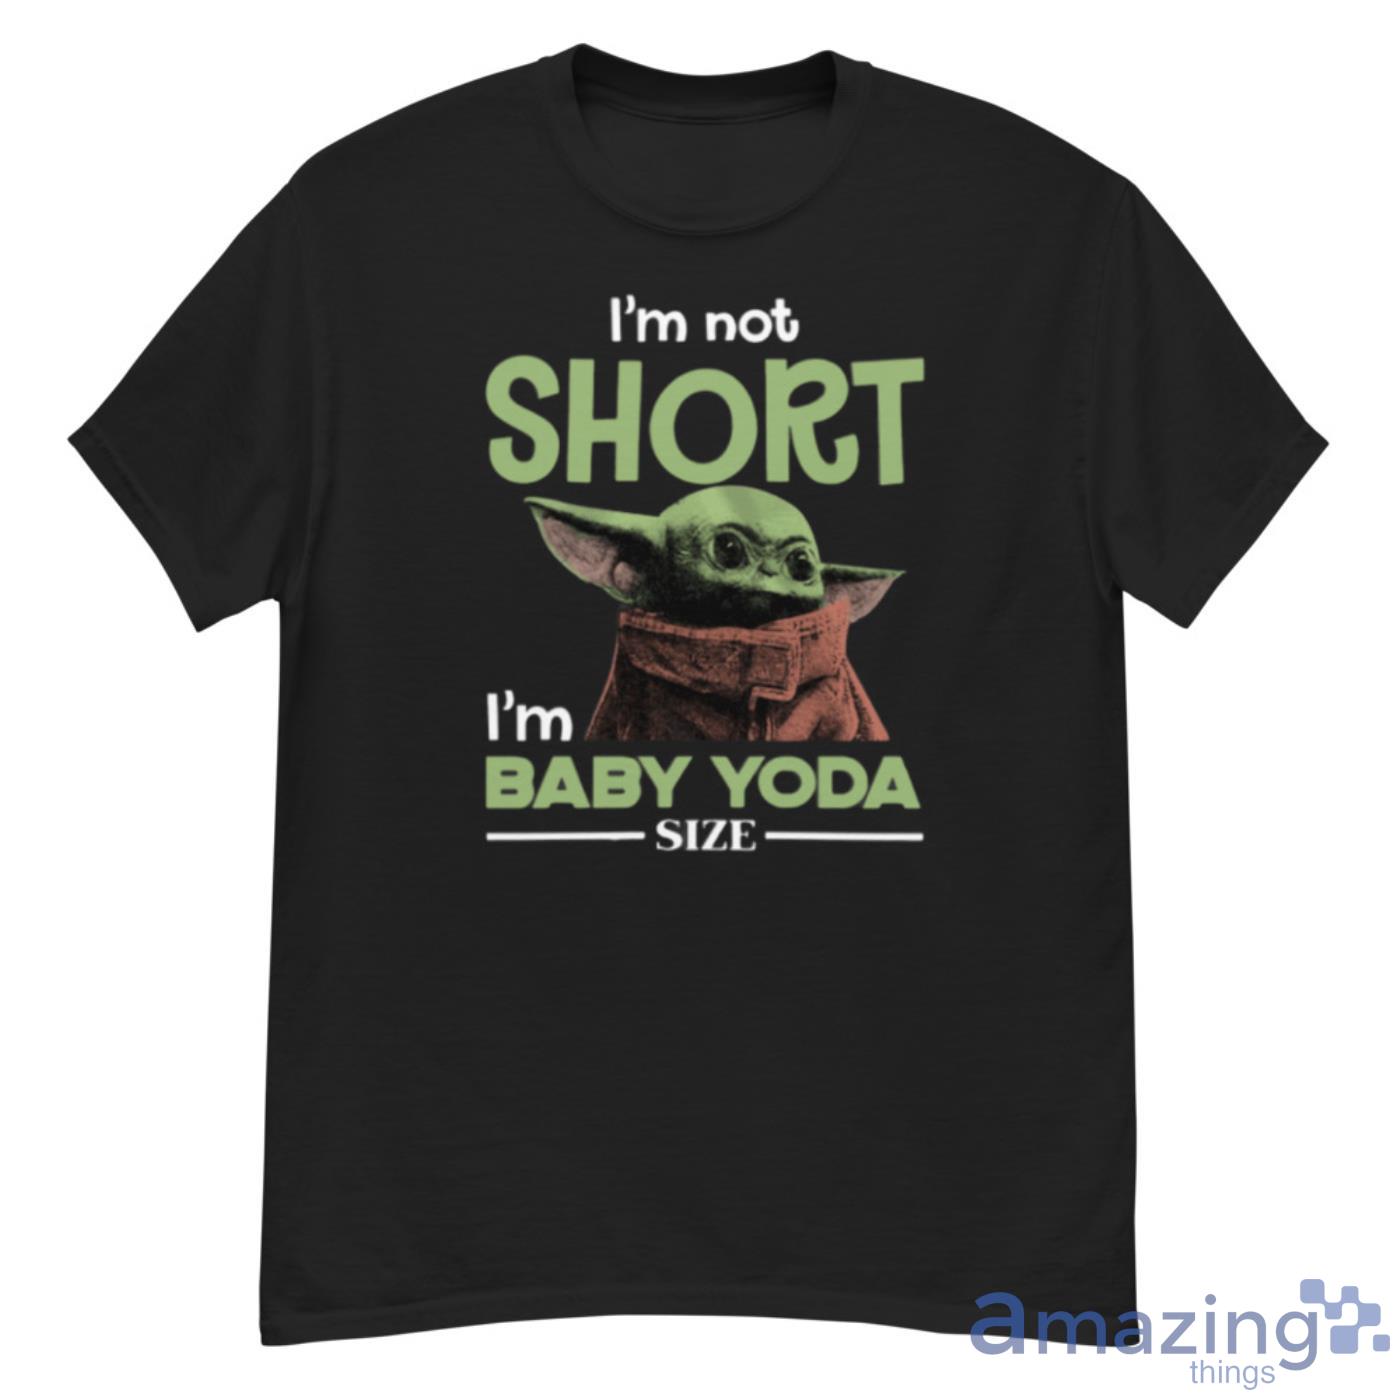 I'm Not Short Baby Size Funny Star Wars Shirts